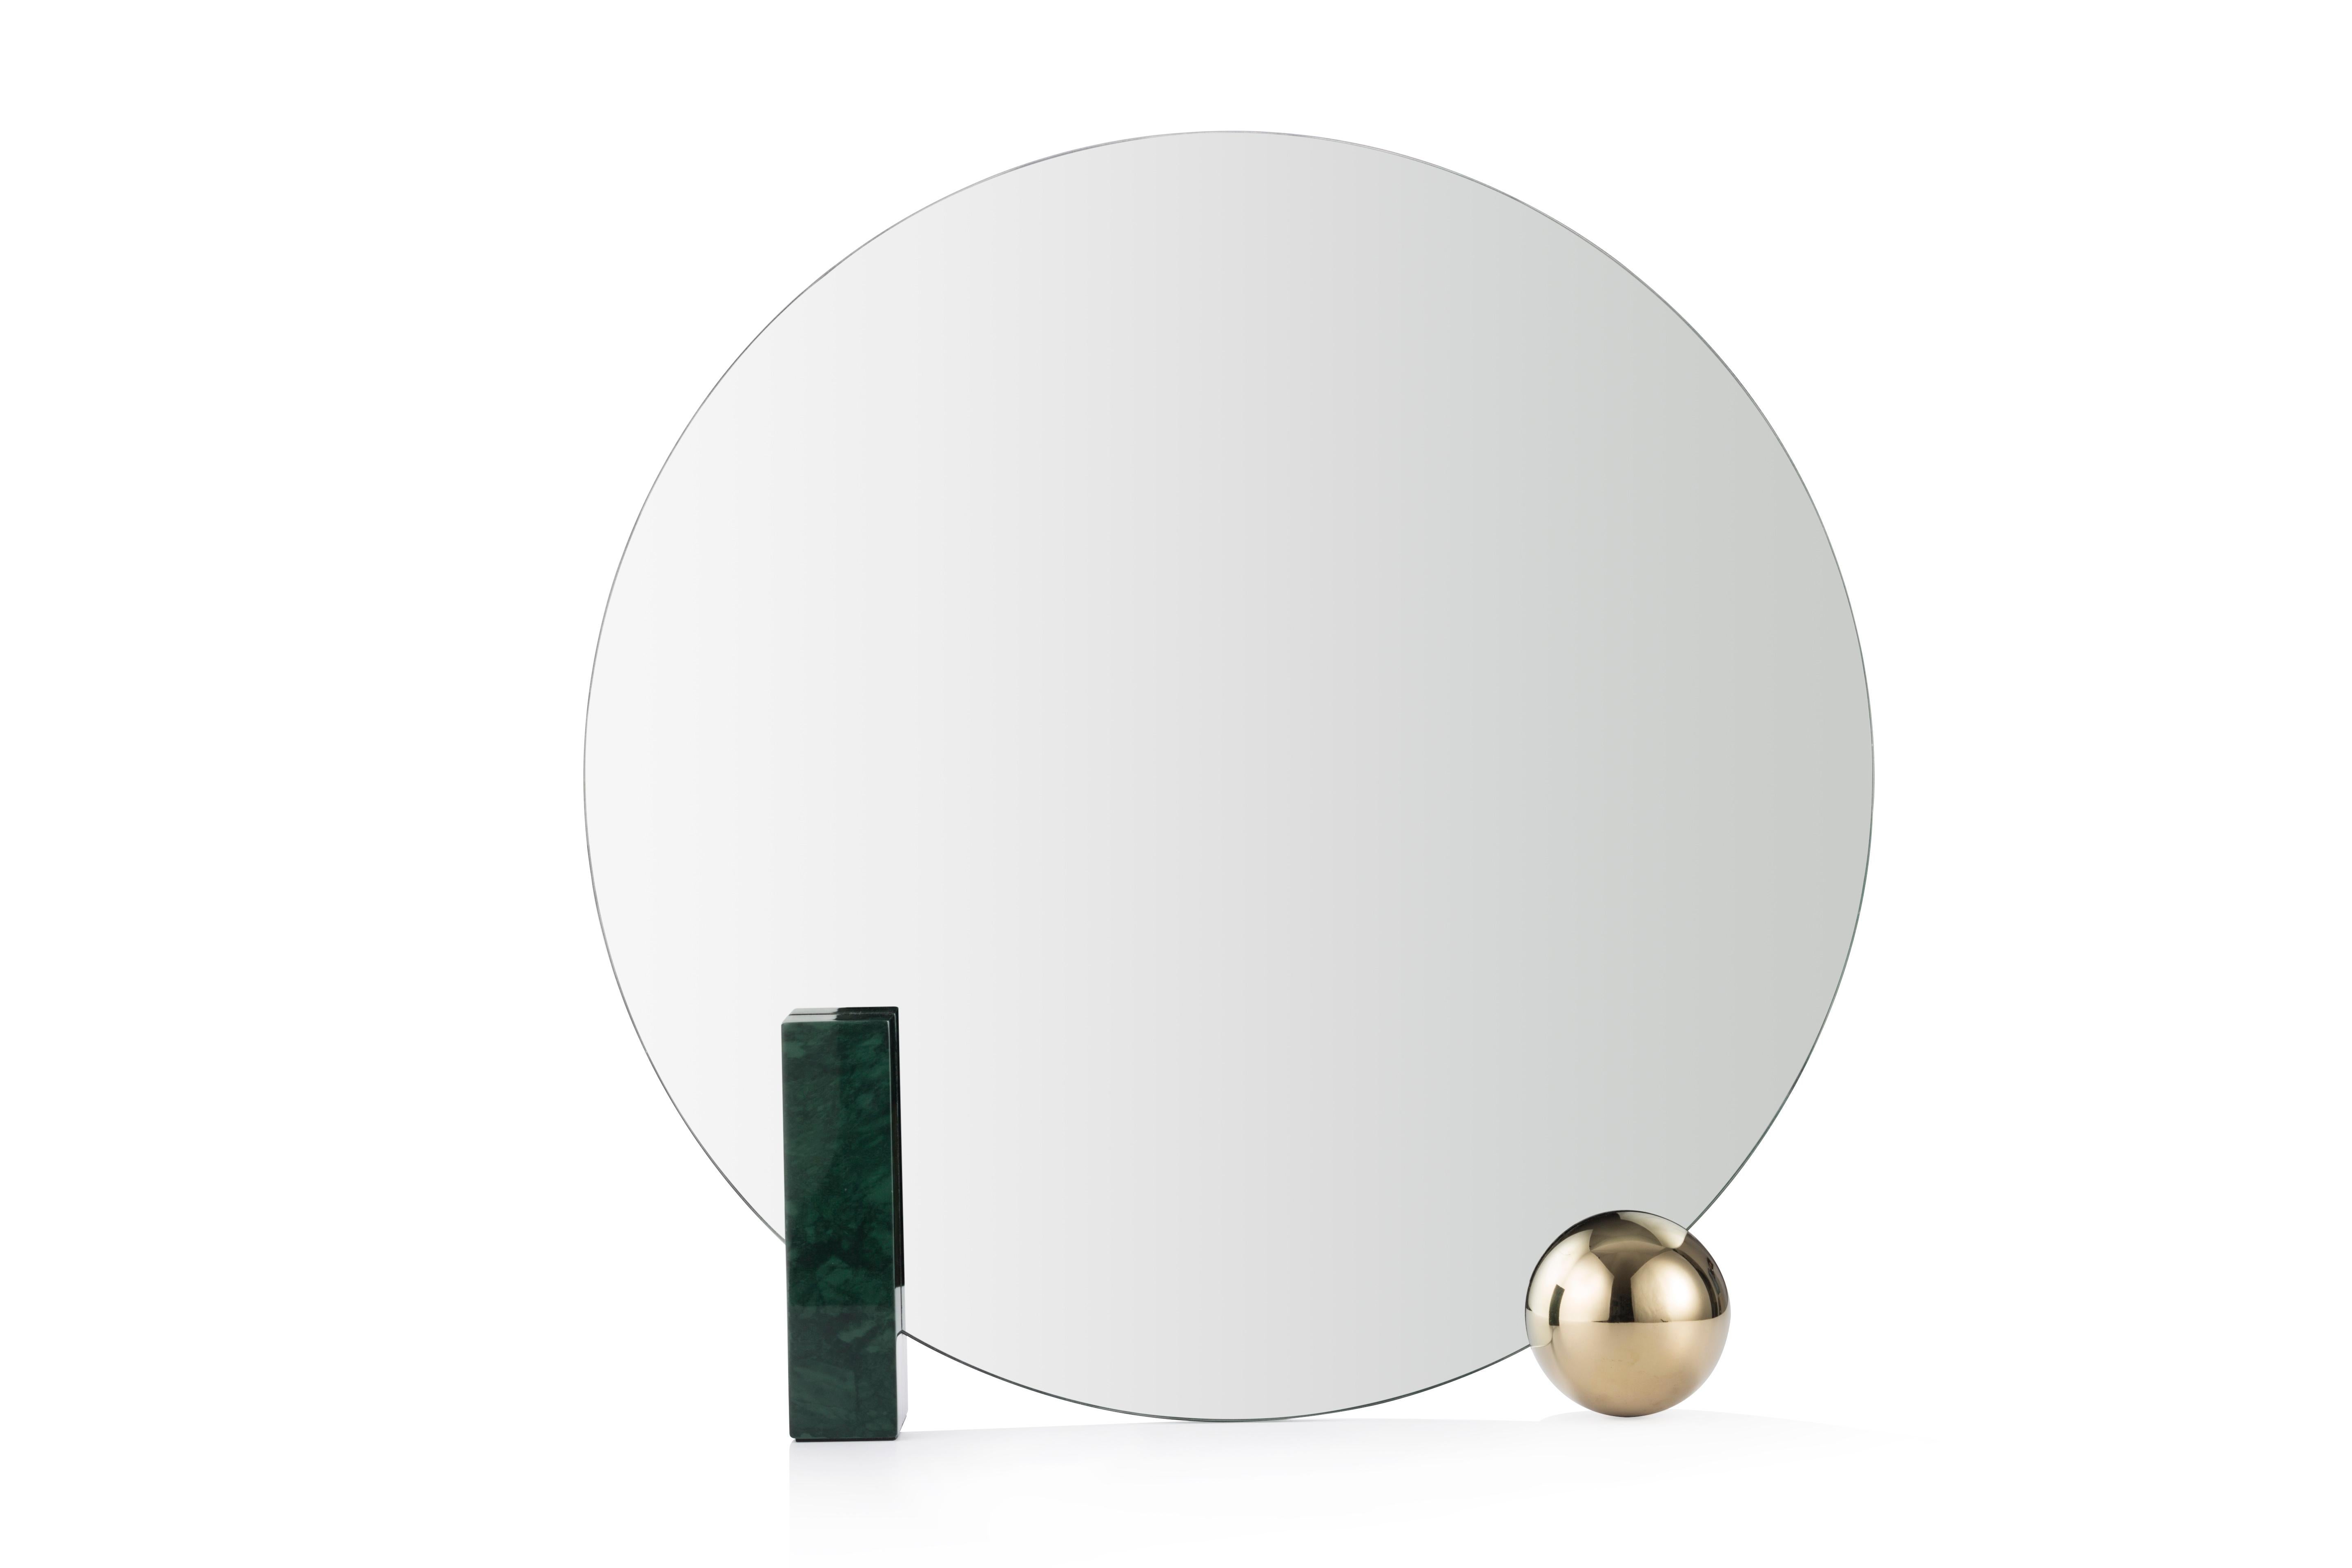 Design by WUU
Measures: Table mirror W 50, D 9, H 50 cm
Rectangular block in ash veneer painted metal or green marble
Round ball-plated metal coated with glossy gold finish
Back mirror in colored-stained ash veneer, celadon color
Clear